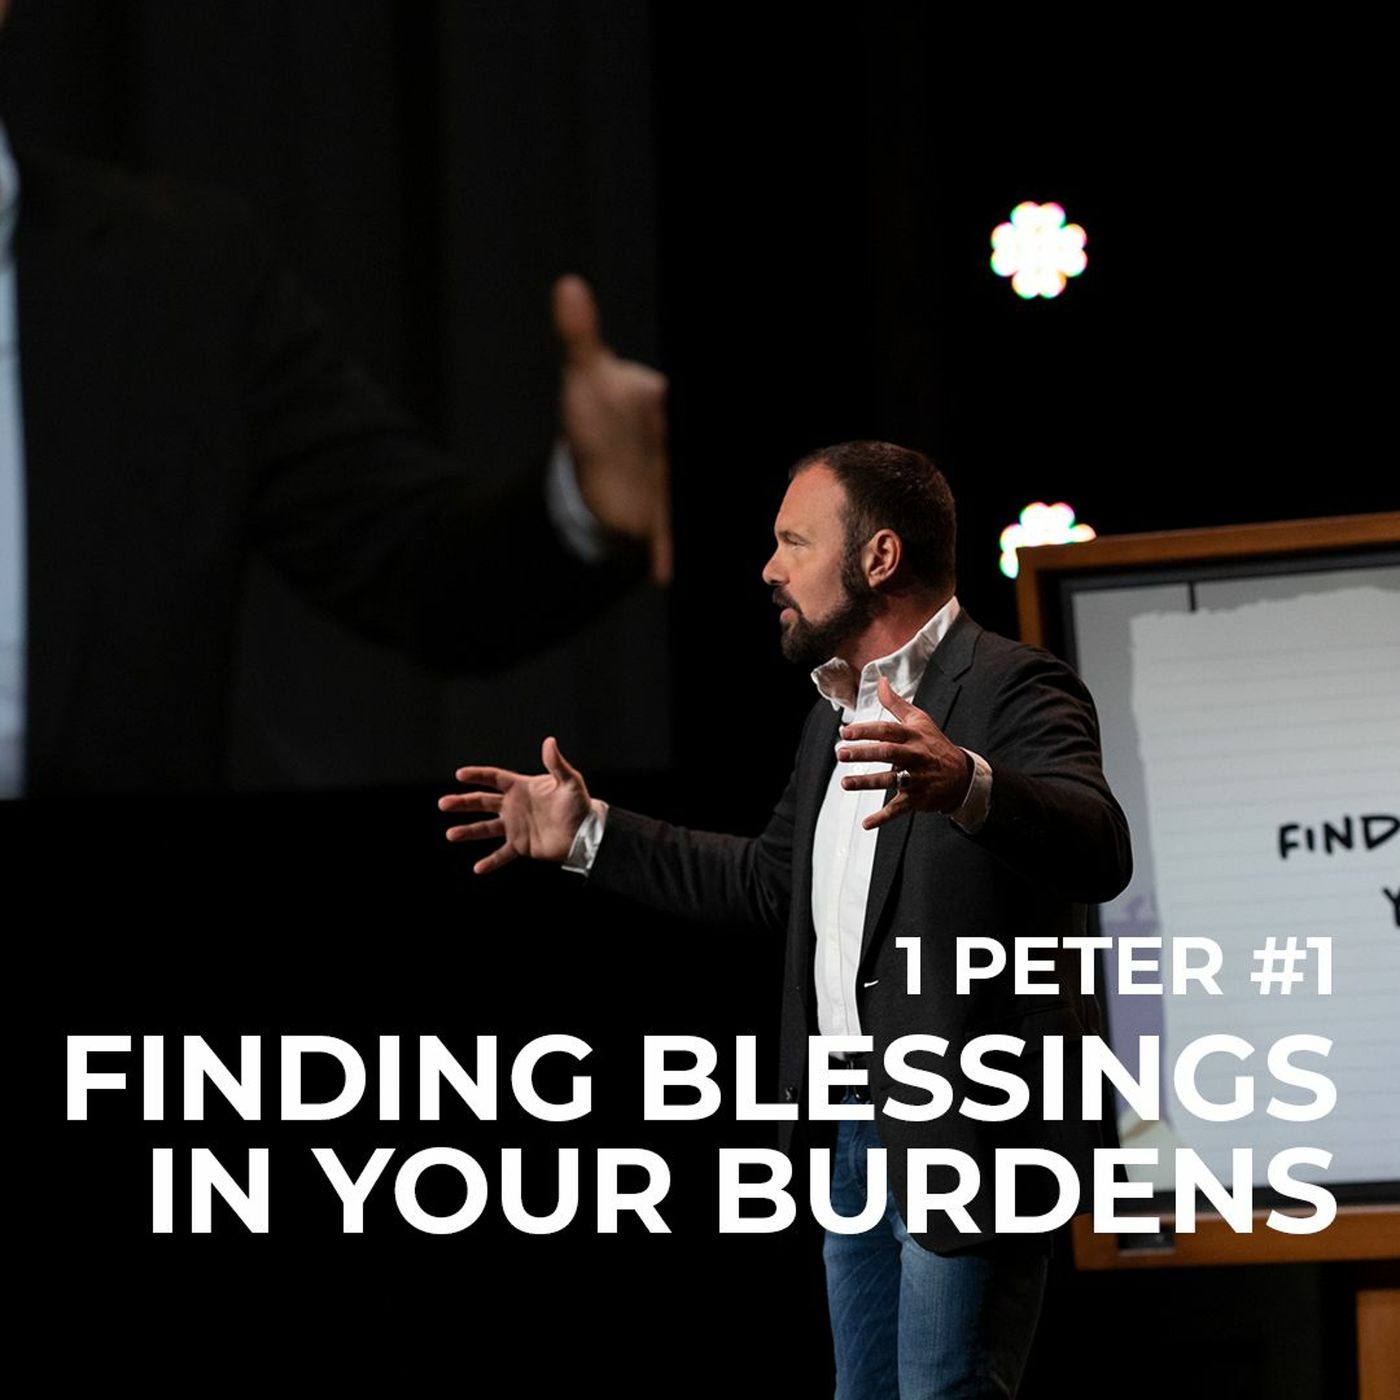 1st Peter #1 - Finding Blessings in your Burdens